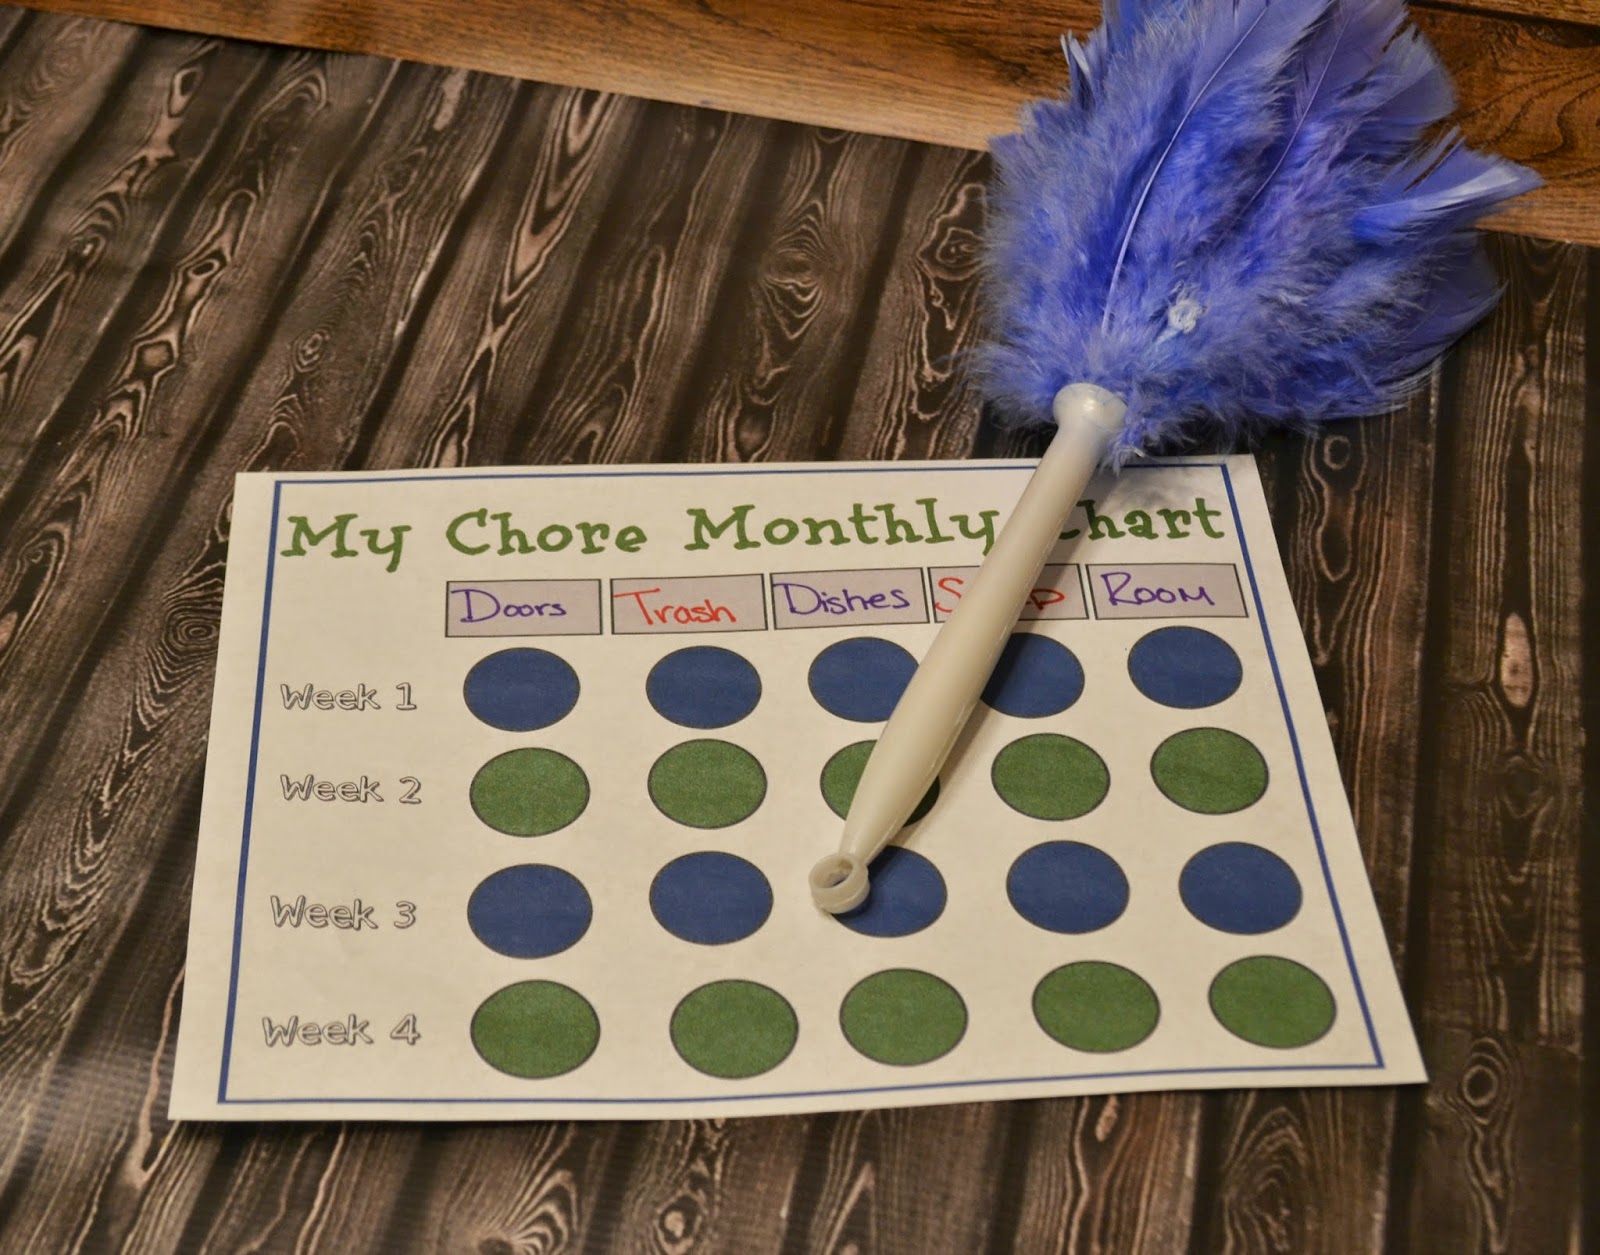  10 Minute Clean, Mommy's Little Helper, Pledge, Windex, Clean home printable chore chart by month